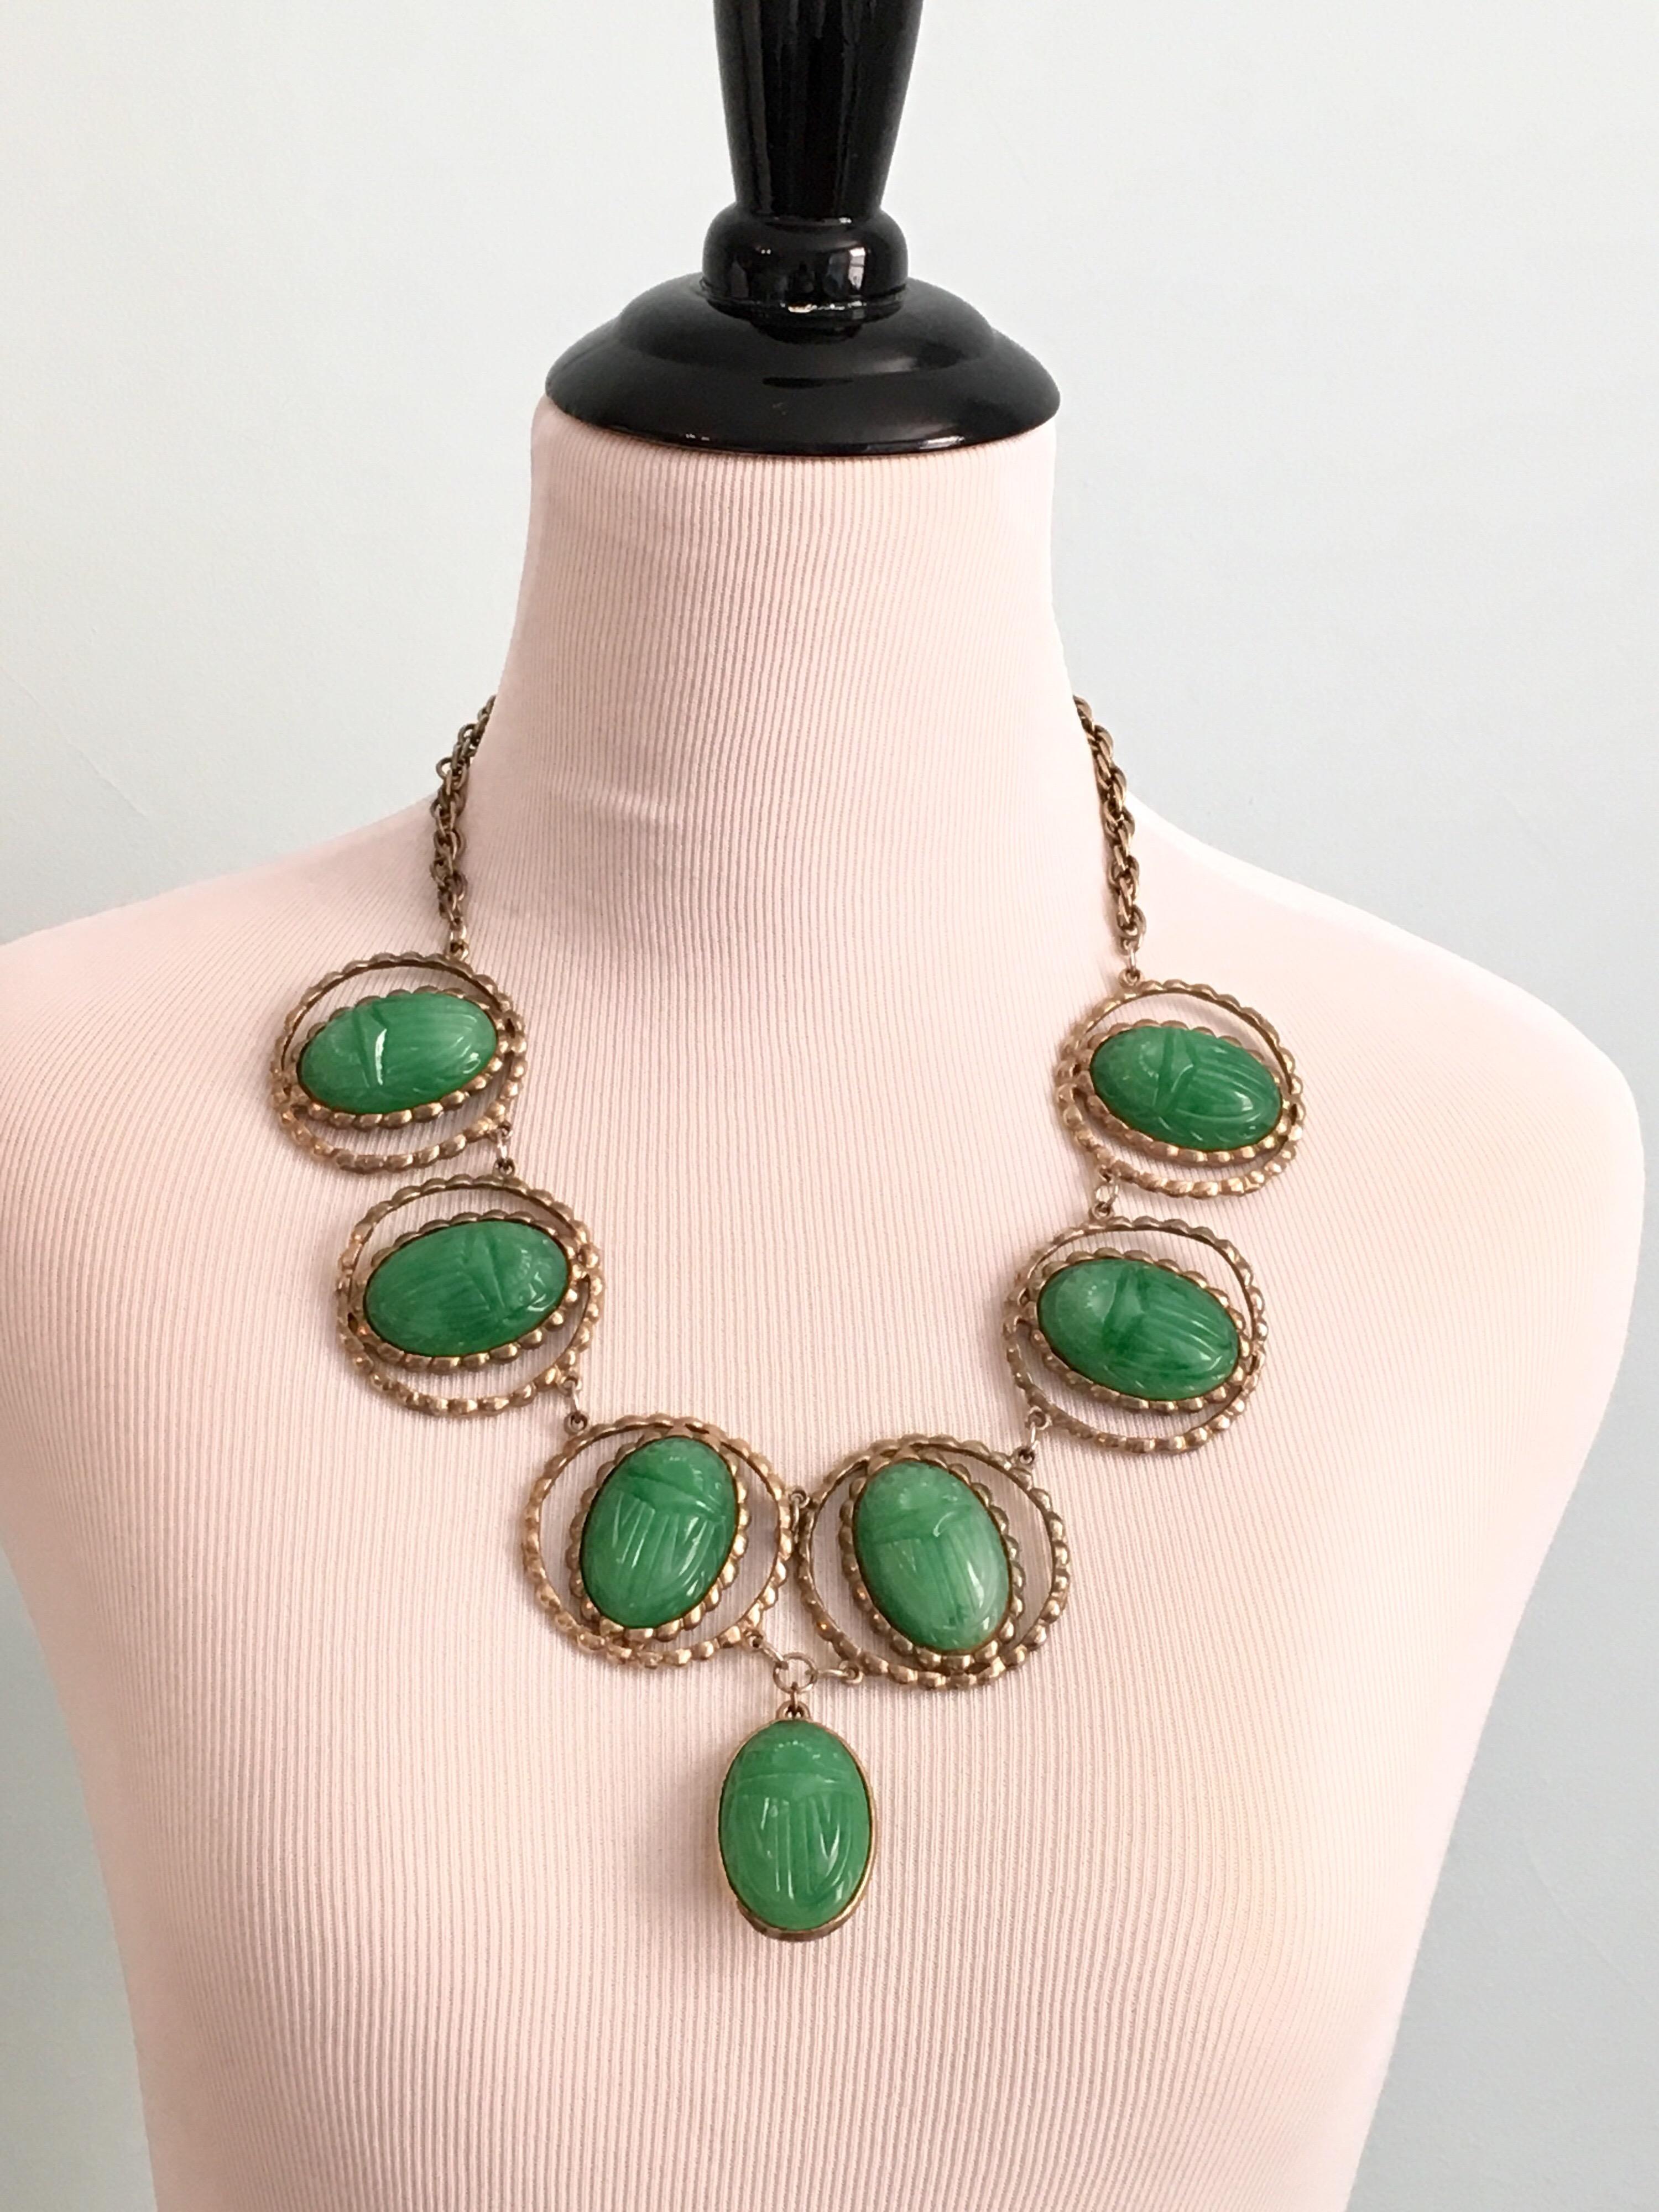 This piece is a show stopper. The necklace is made out of seven large green scarabs. The six scarabs making up the necklace portion have a diameter of 1 3/4 inches. The hanging scarab pendant at the center front measures 1 3/4 inches long. The total